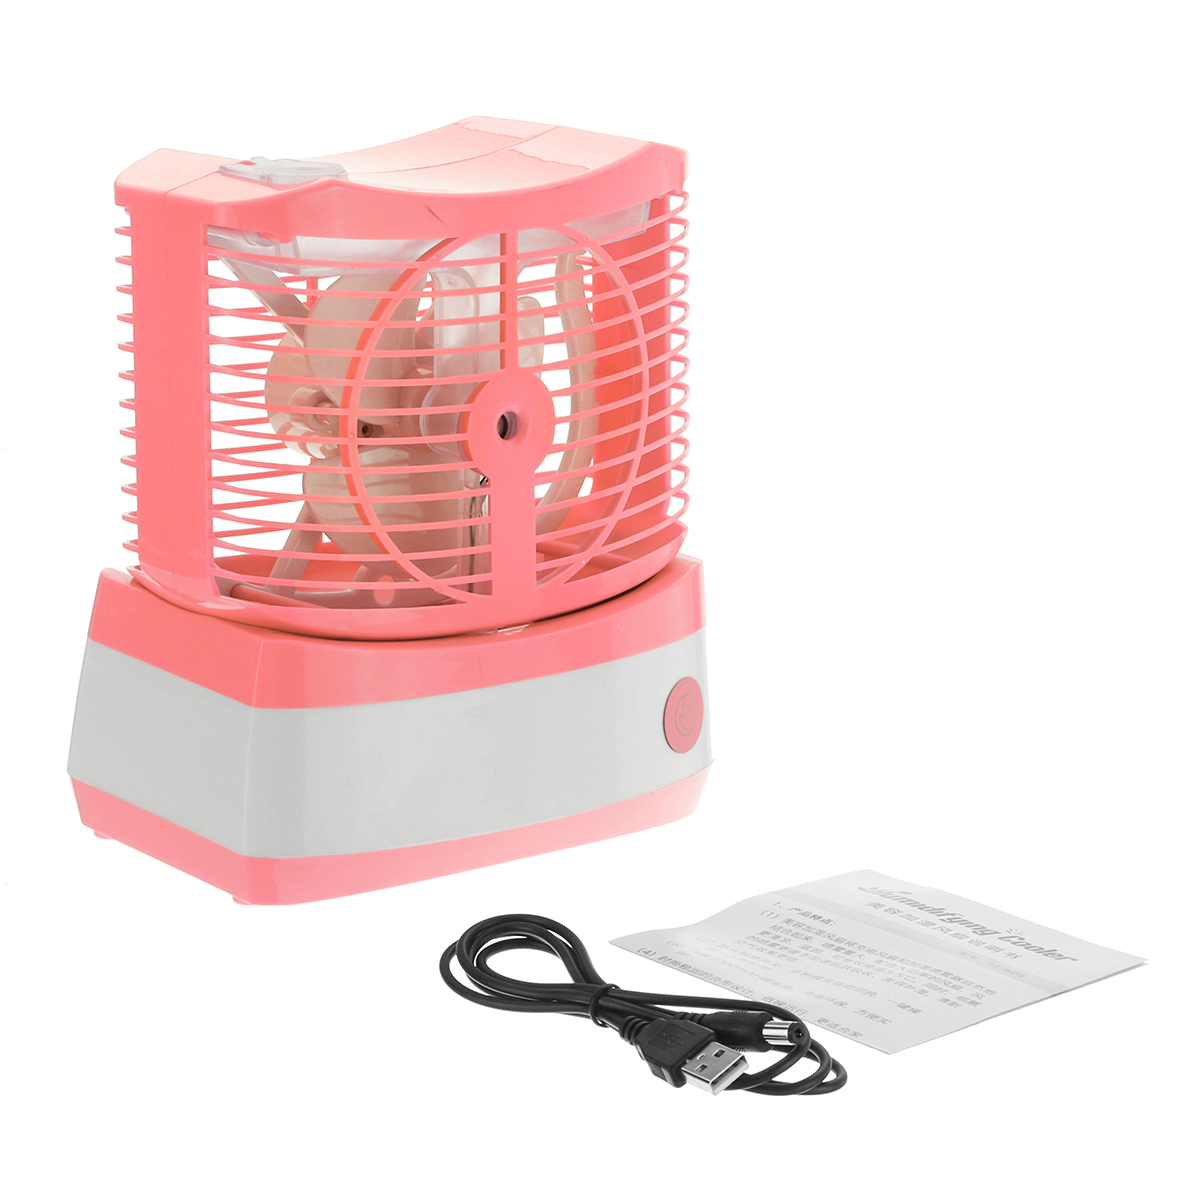 USB-Portable-Mini-ABS-Fan-Cooling-Desktop-Air-Conditioner-Fan-Humidified-Foggy-1419352-7